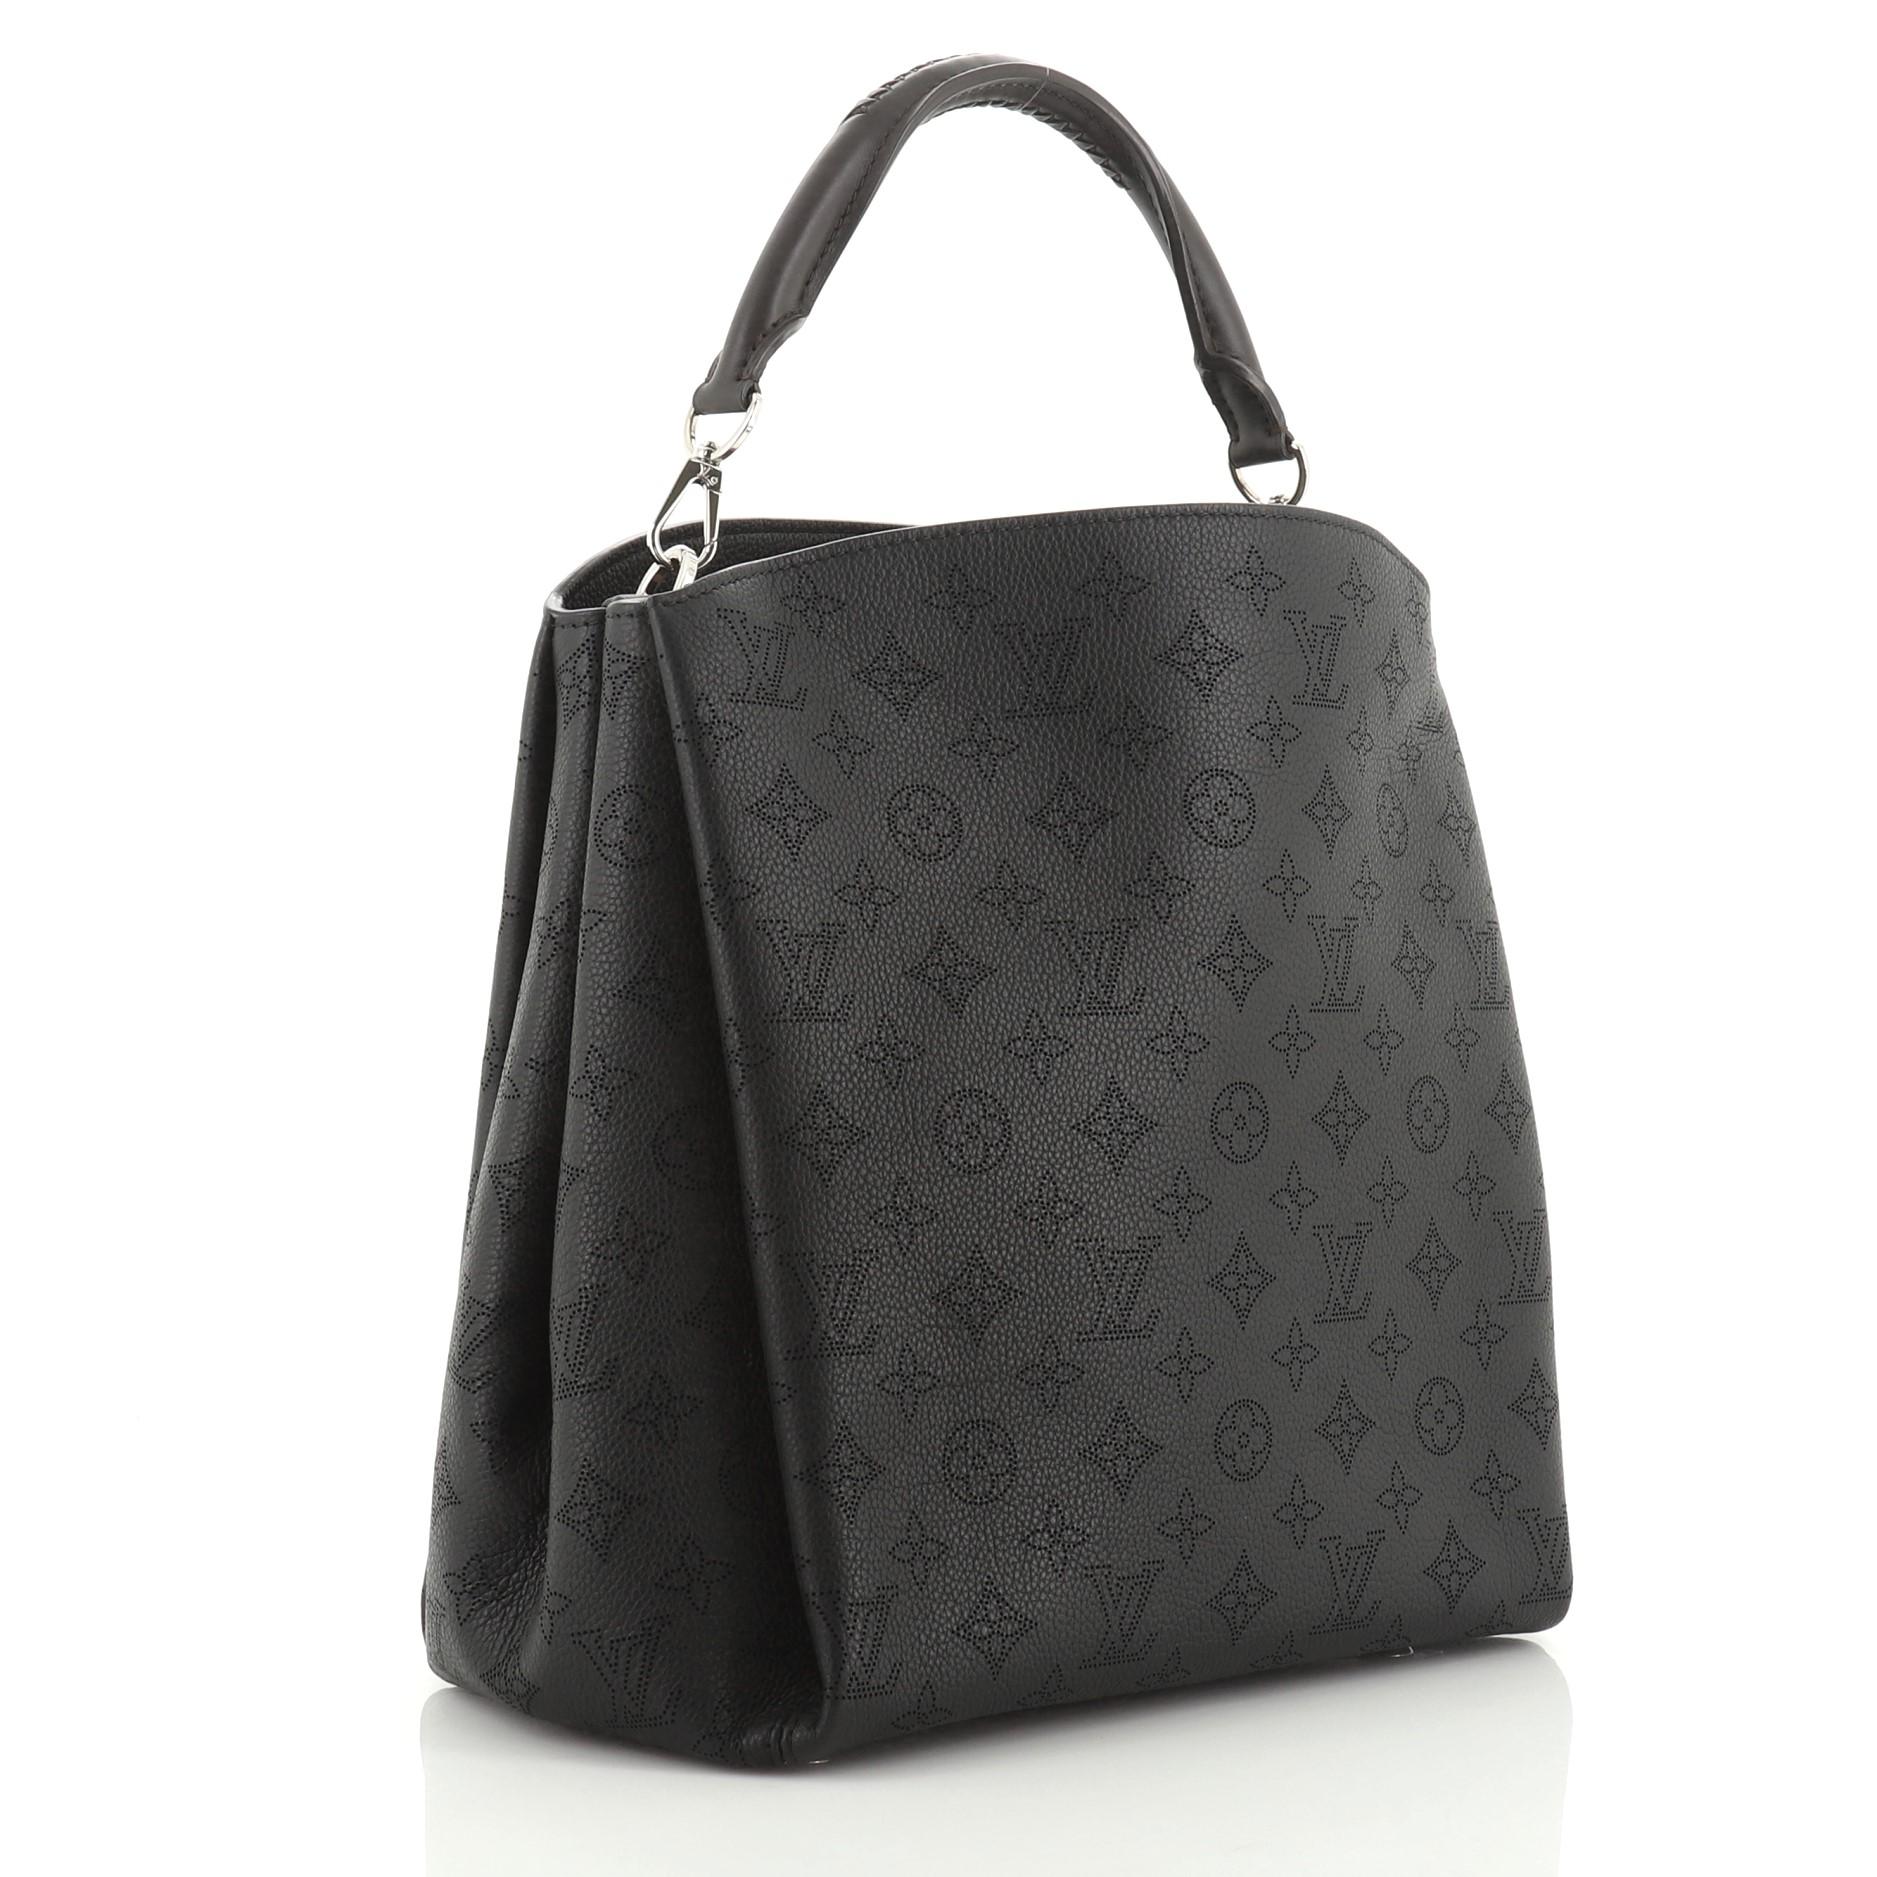 This Louis Vuitton Babylone Handbag Mahina Leather PM, crafted in black mahina leather, features a braided leather top handle and silver-tone hardware. It opens to a brown microfiber interior with zip and slip pockets. Authenticity code reads: